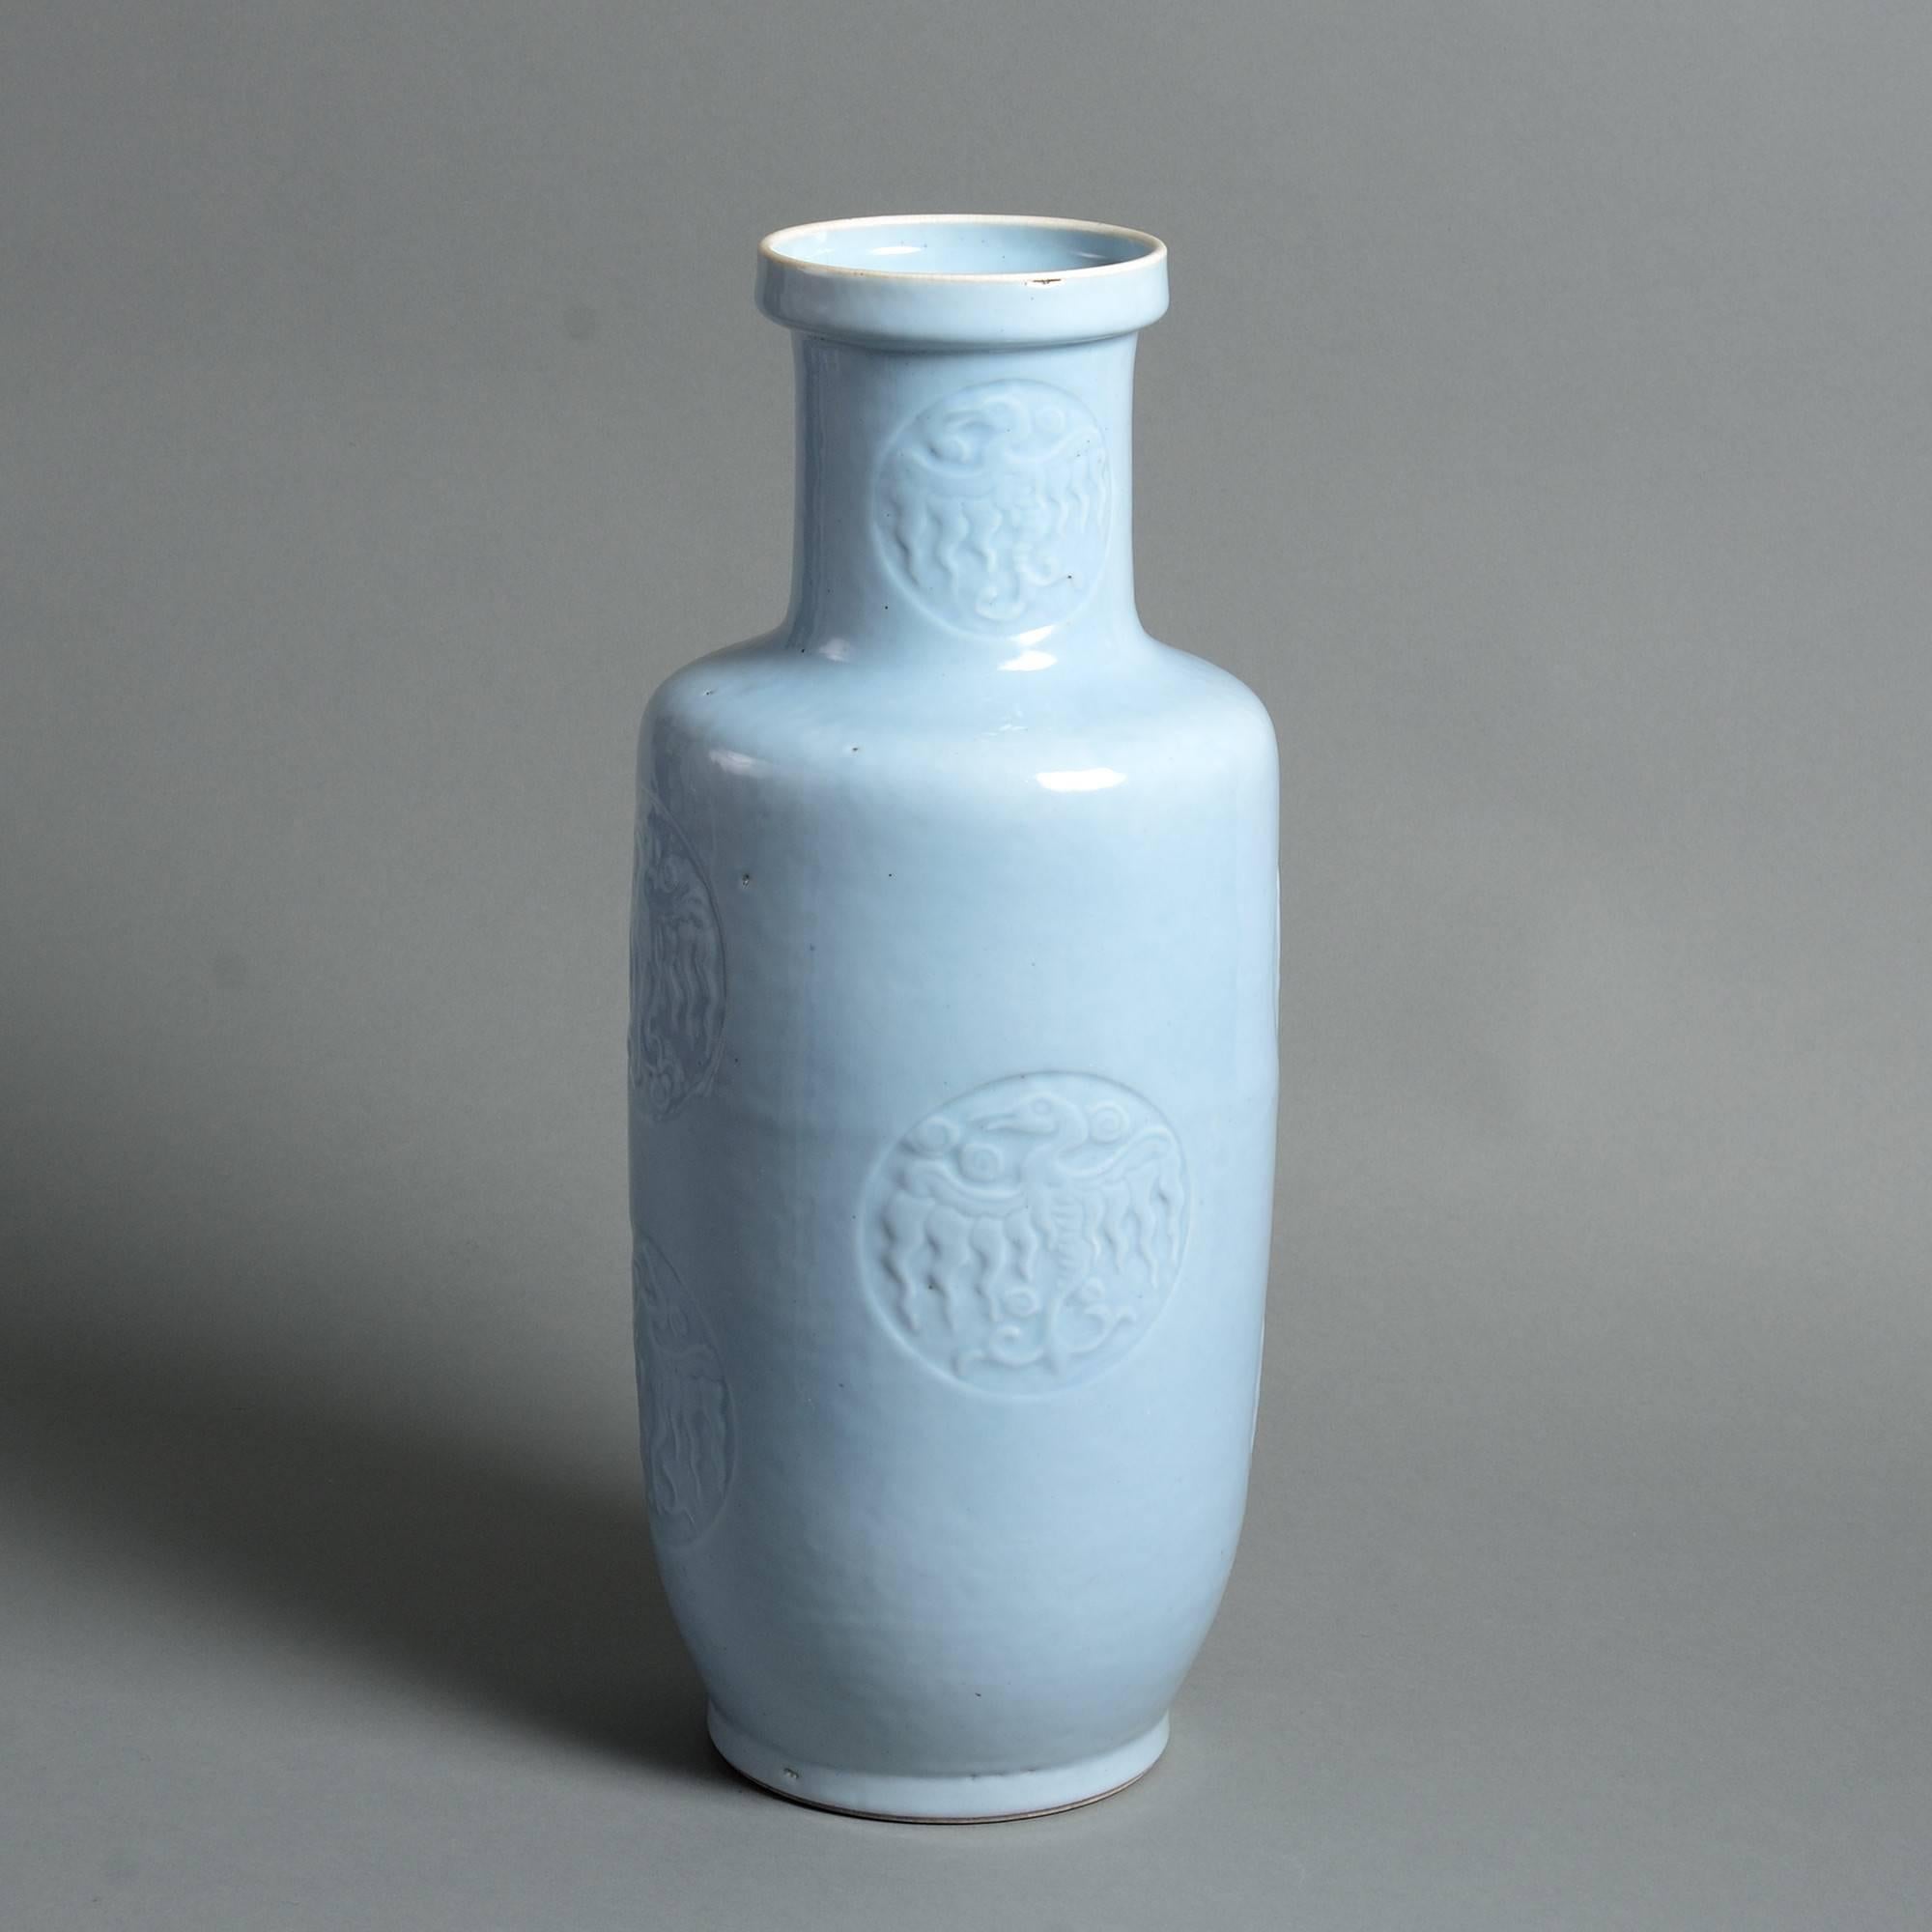 A fine mid-19th century clair de lune glazed porcelain rouleau vase, the body with decoration in shallow relief. 

Qing dynasty, Xianfeng period (1851-1861).

Good condition with some firing imperfections to rim and body.